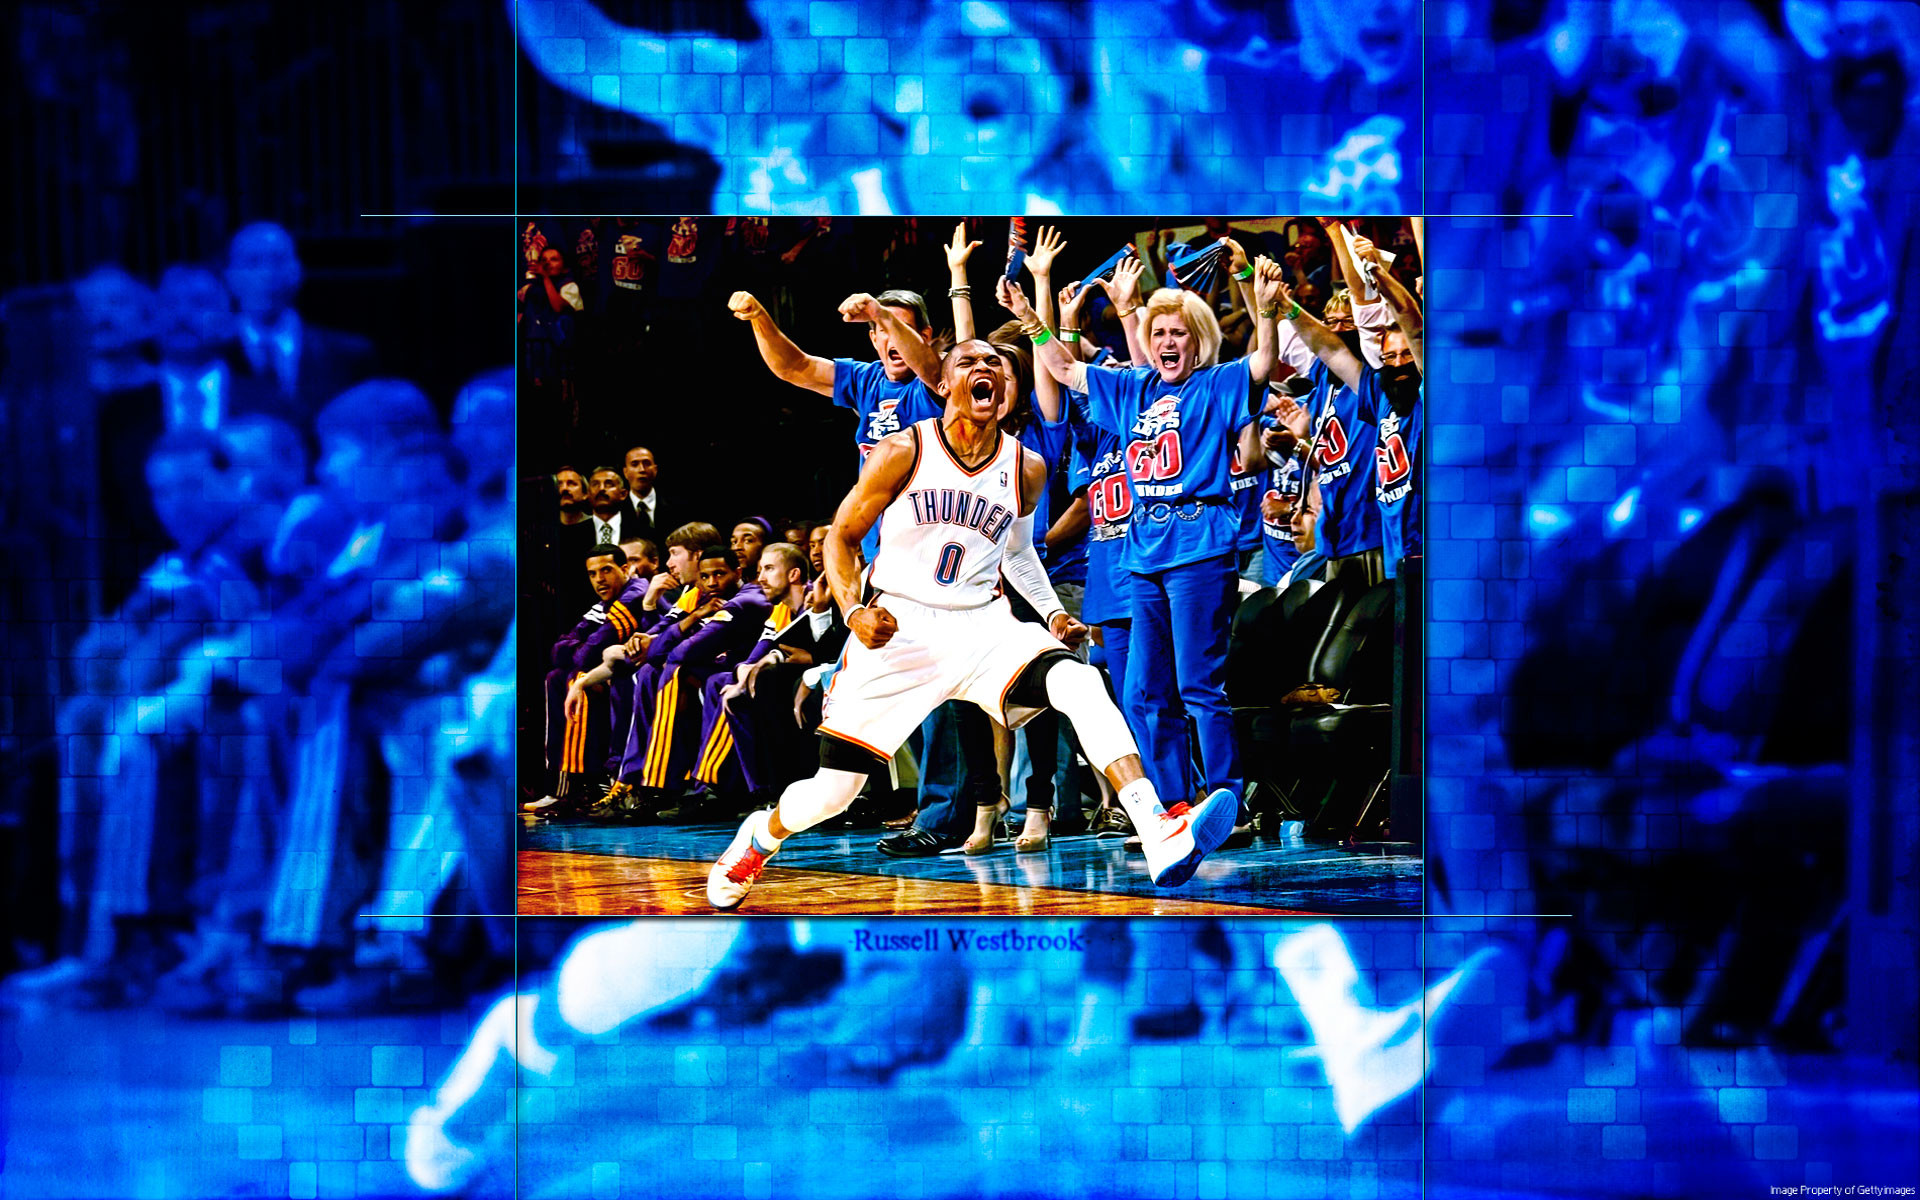 1920x1200 Russell Westbrook Wallpapers | Basketball Wallpapers at .